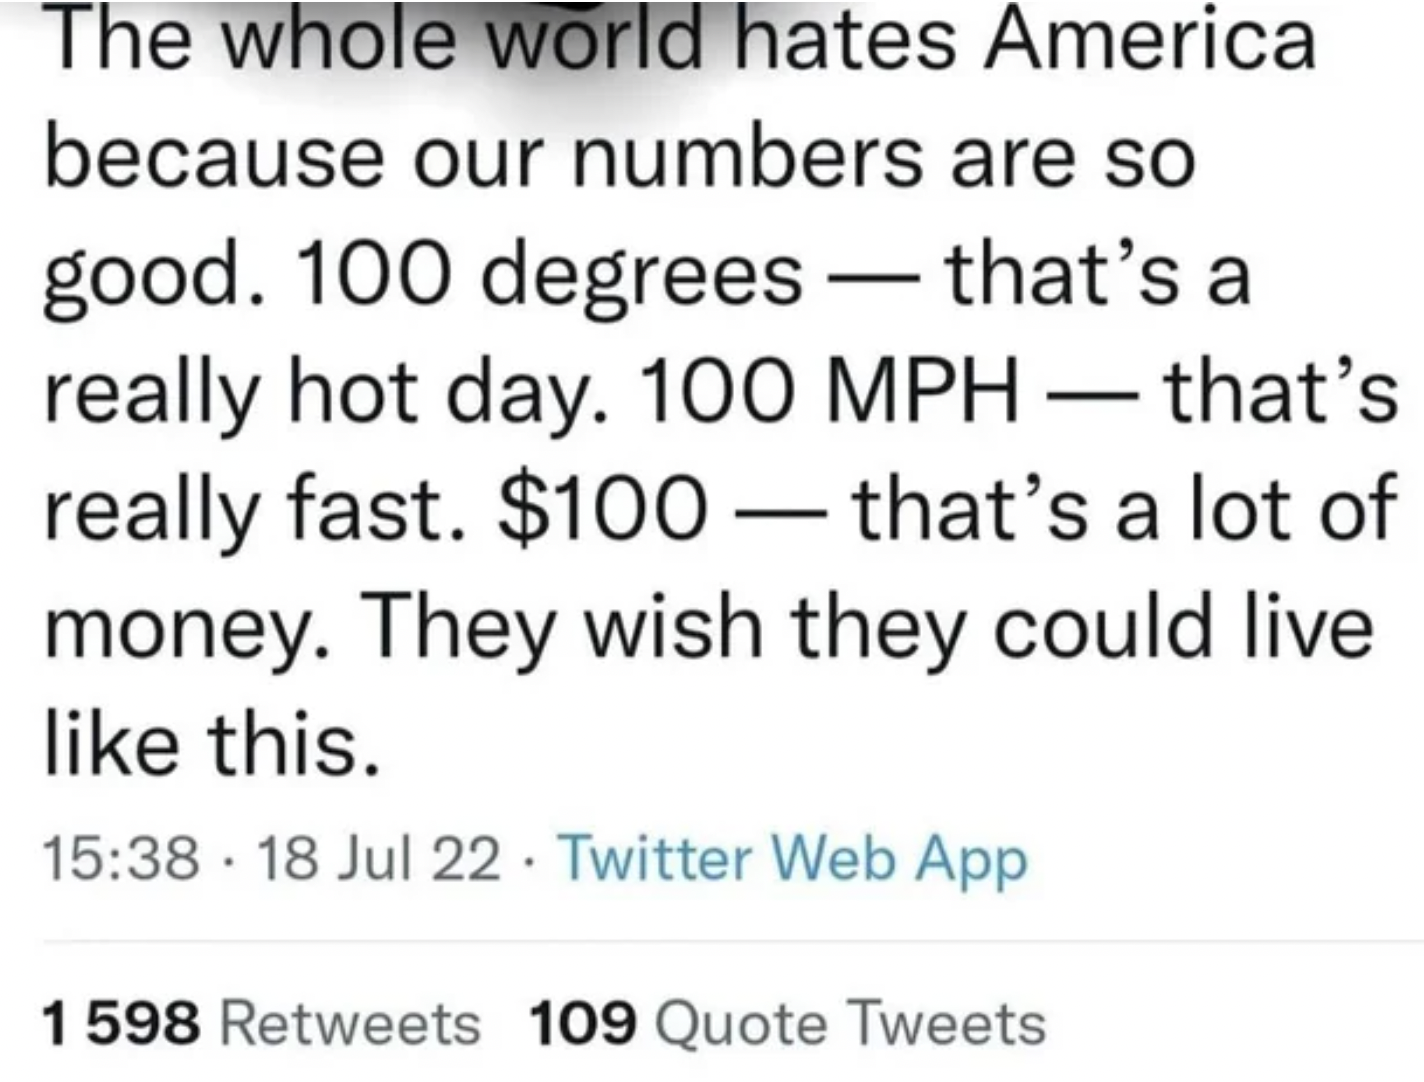 The whole world hates America because our numbers are so good. 100 degrees that's a really hot day. 100 Mph that's really fast. $100 that's a lot of money. They wish they could live this. 18 Jul 22. Twitter Web App 1598 109 Quote Tweets